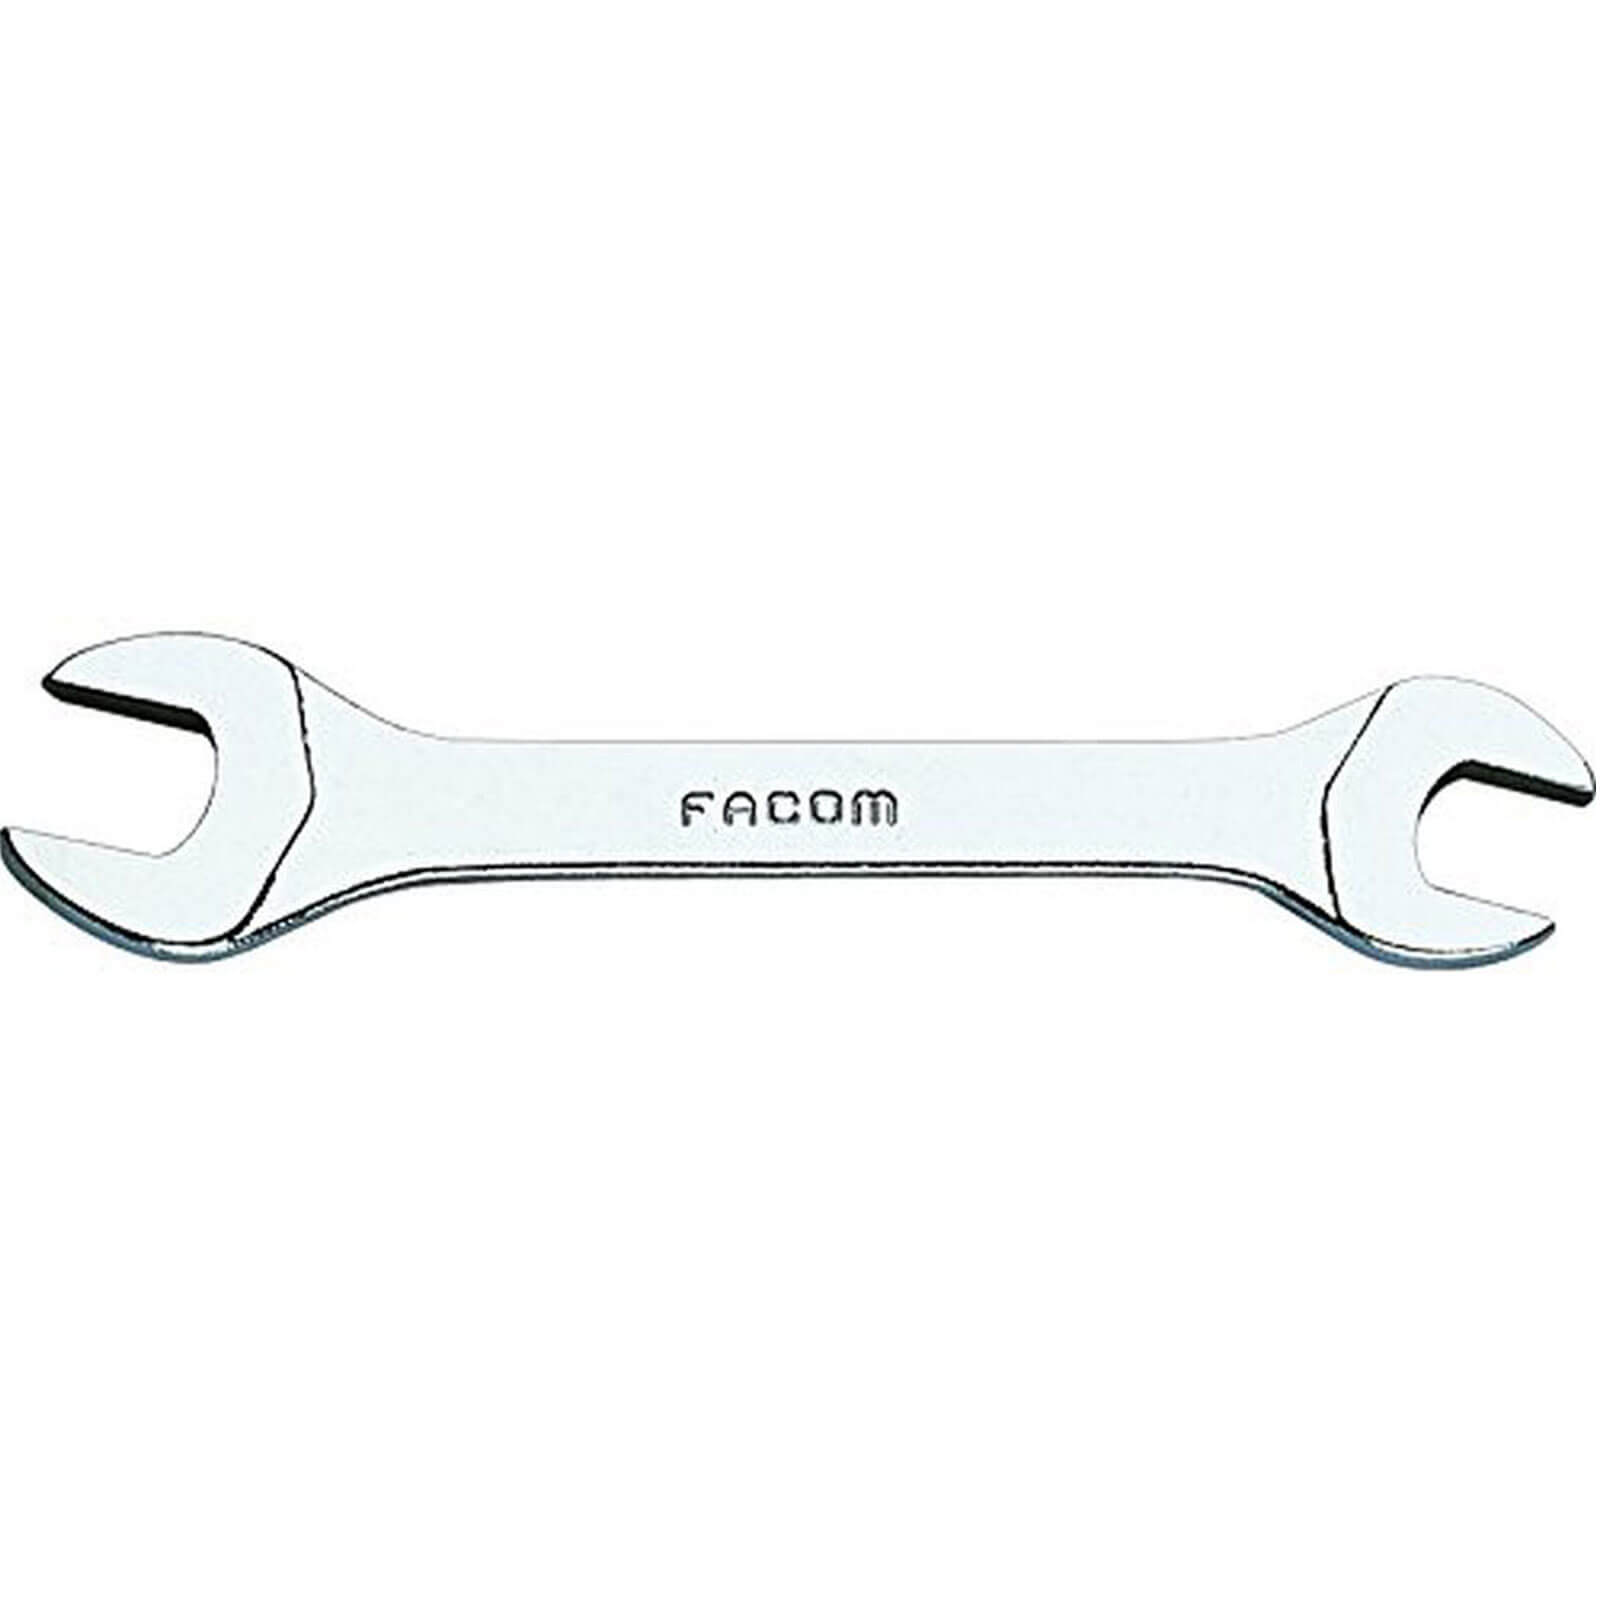 Image of Facom Miniature Open End Spanner Metric 10mm x 11mm